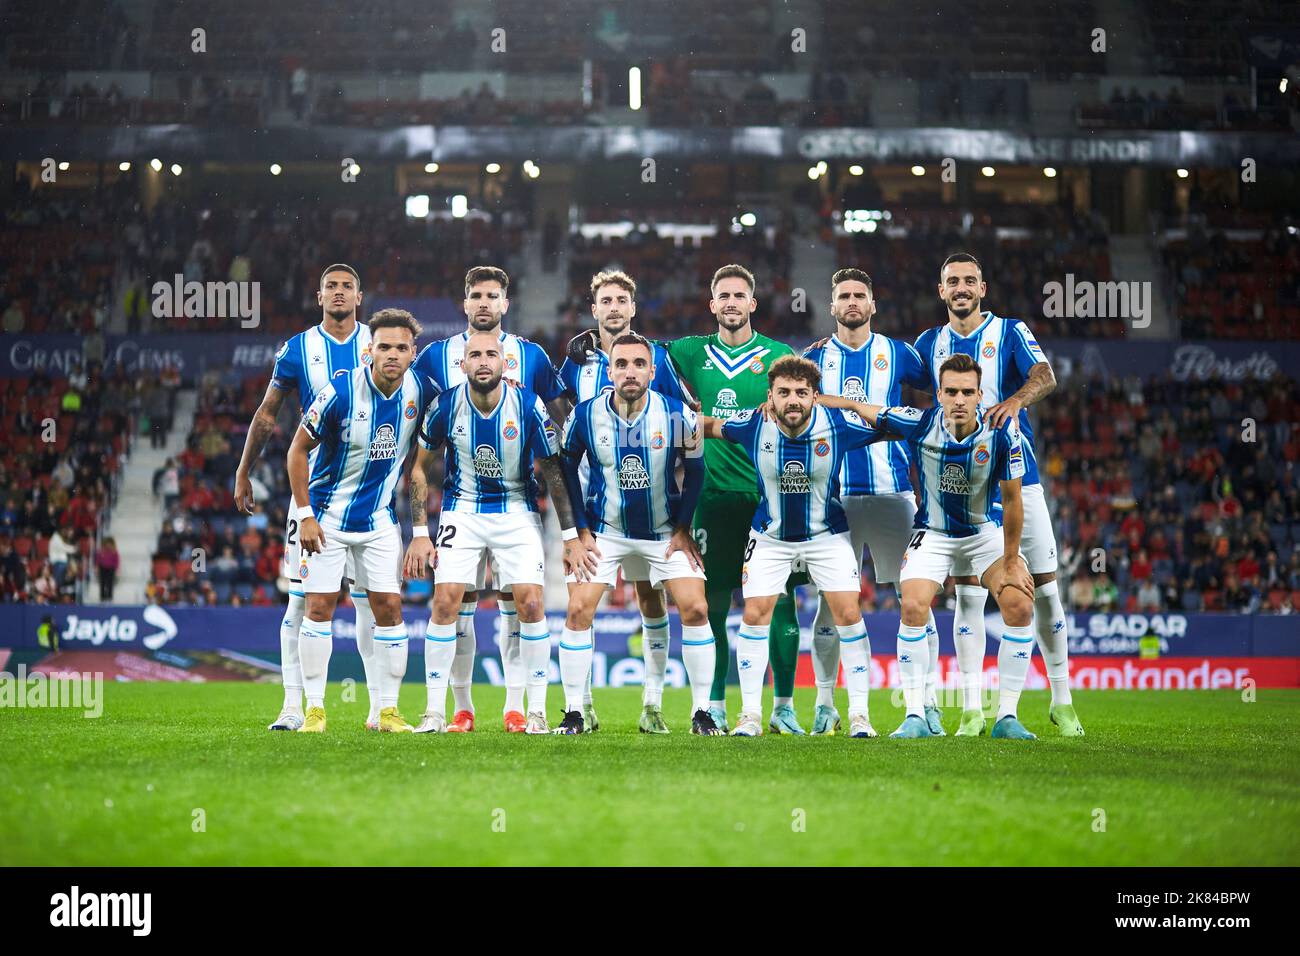 Pamplona, Spain. 20th Oct, 2022. PAMPLONA, SPAIN - OCTOBER 20: Players of RCD Espanyol line up prior the La Liga Santander match between CA Osasuna and RCD Espanyol on October 20, 2022 at El Sadar in Pamplona, Spain. (Photo by Ricardo Larreina/AFLO) Credit: Aflo Co. Ltd./Alamy Live News Stock Photo